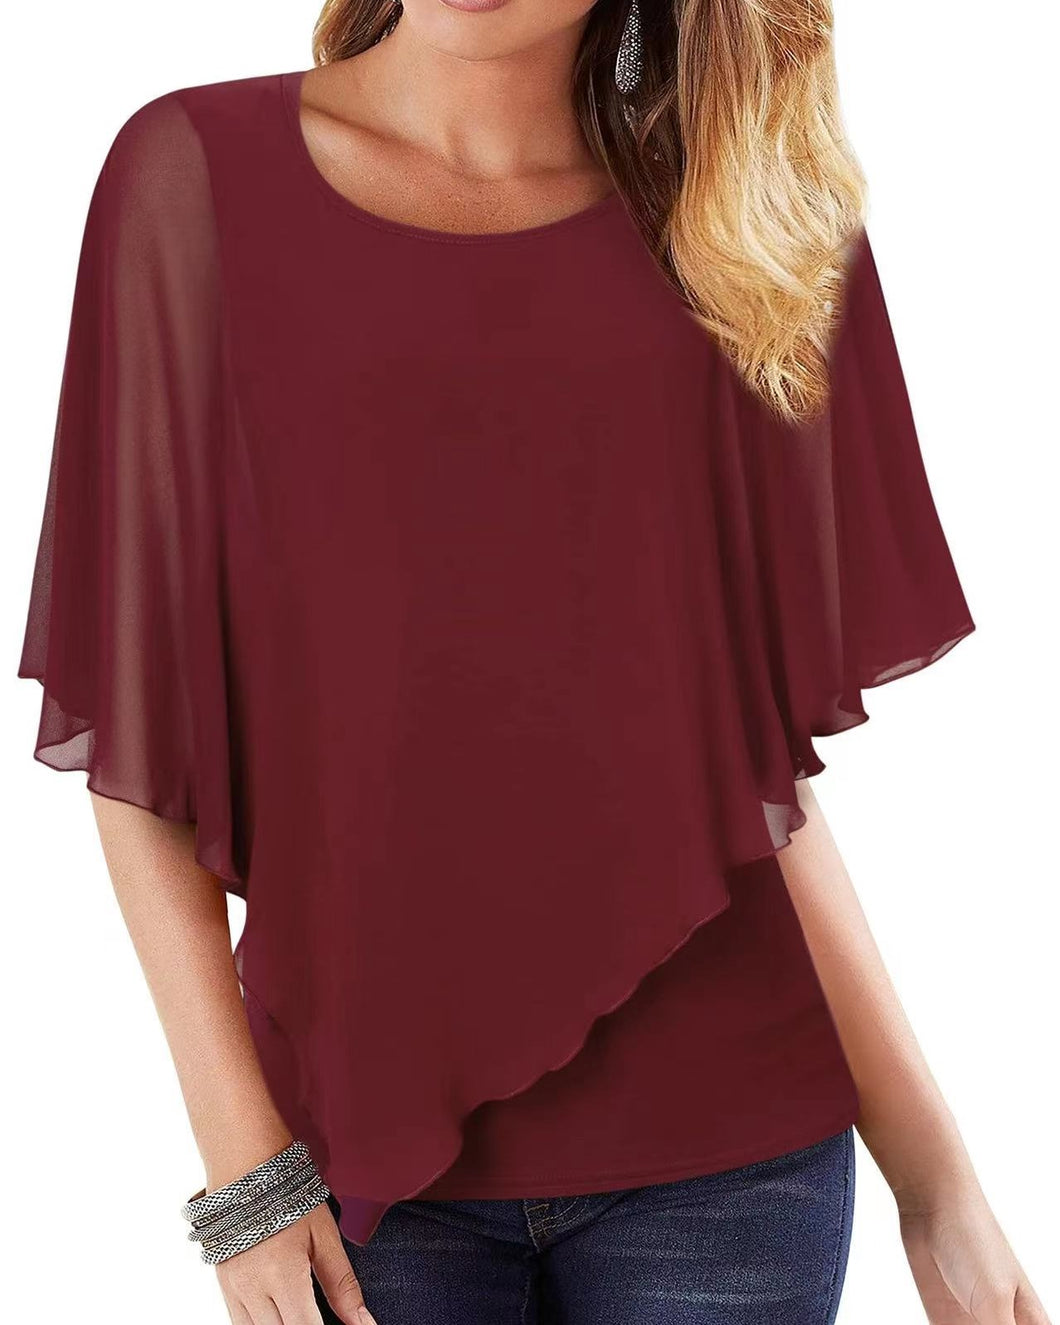 Women's T-Shirt Solid Color Casual Red